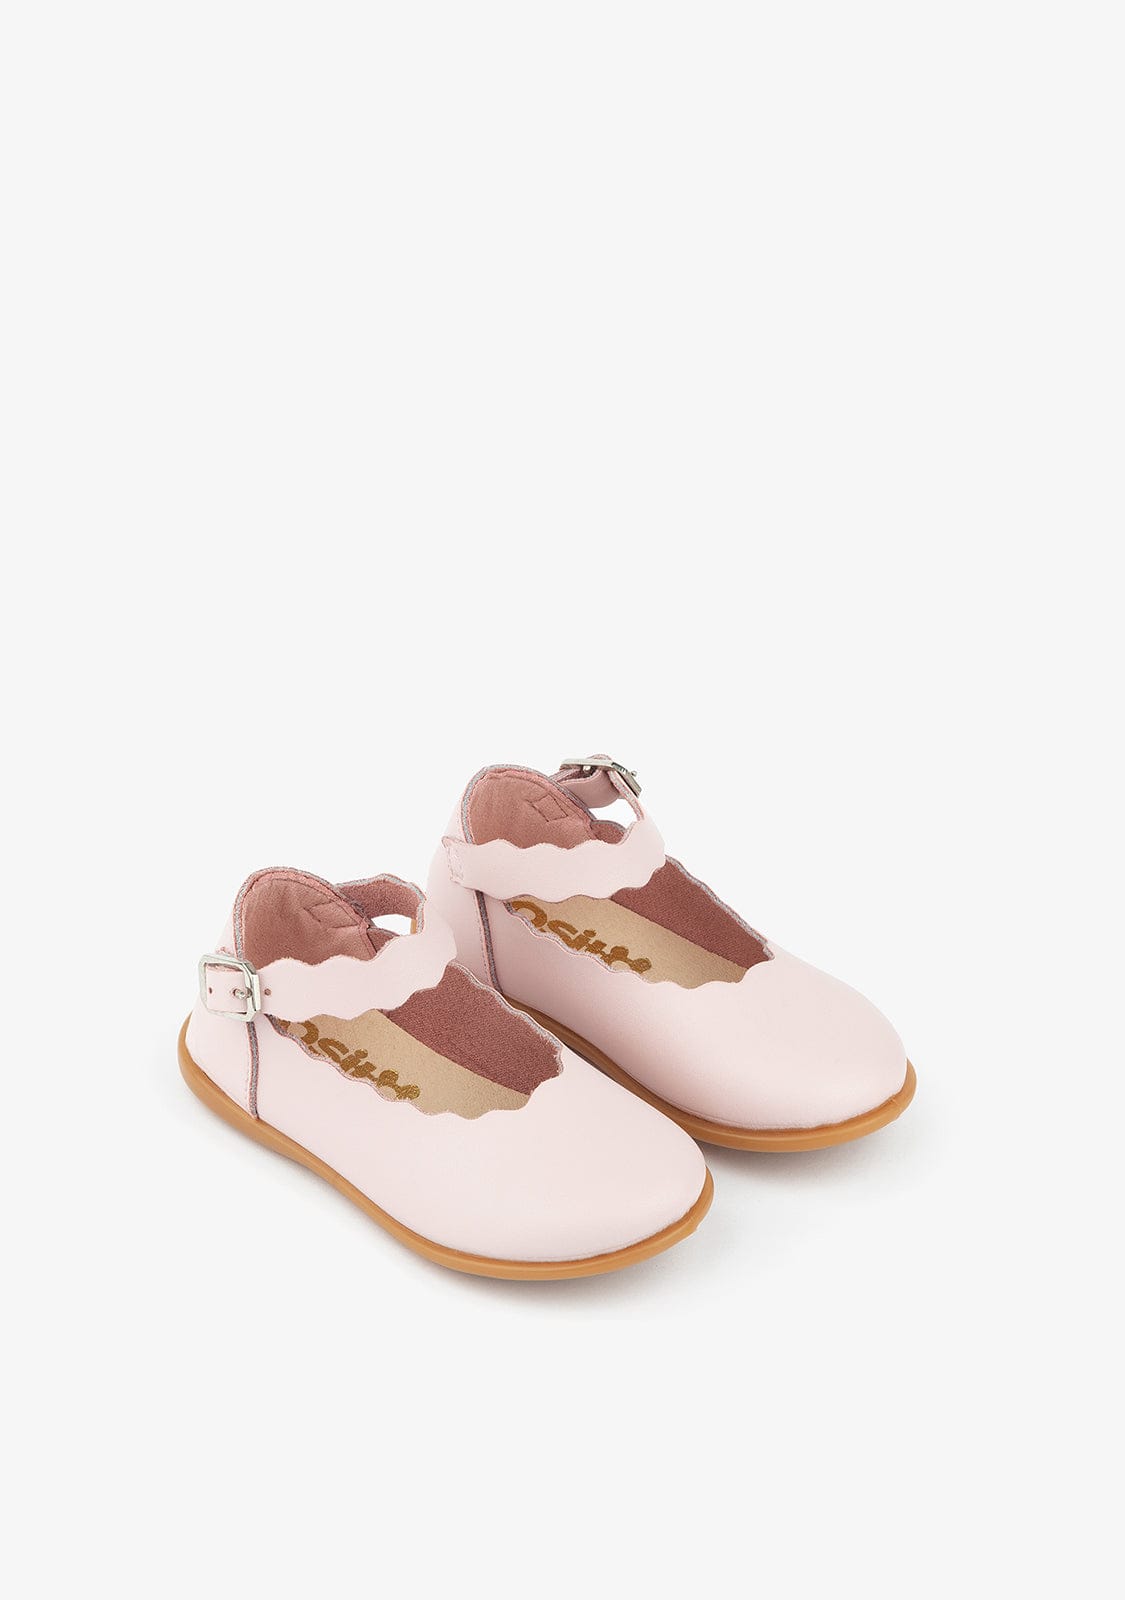 OSITO Shoes Baby's Pink Waves Washable Leather Mary Janes